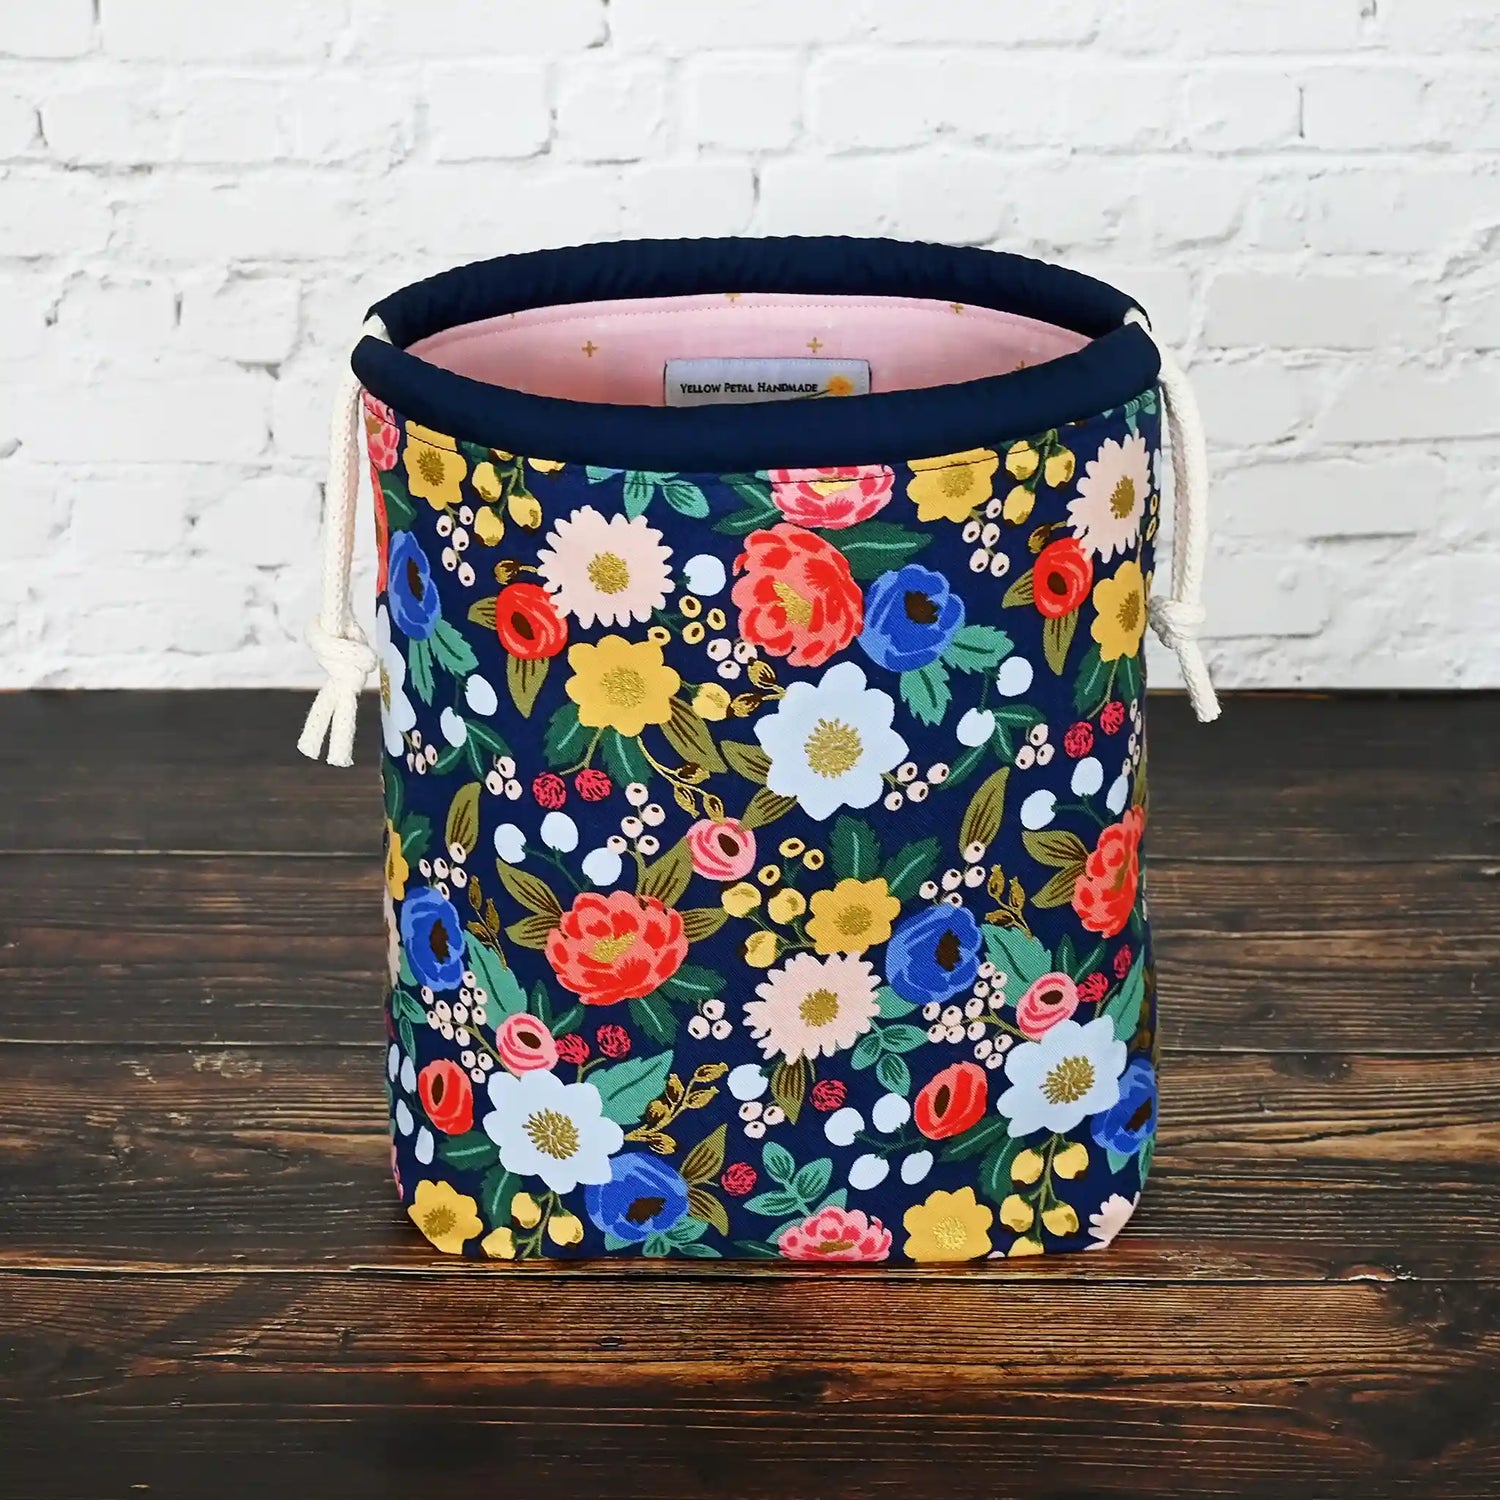 Navy floral drawstring bag for knitting or crochet.  Made from Rifle Paper Co's Vintage Garden collection.  Made in Nova Scotia, Canada by Yellow Petal Handmade.